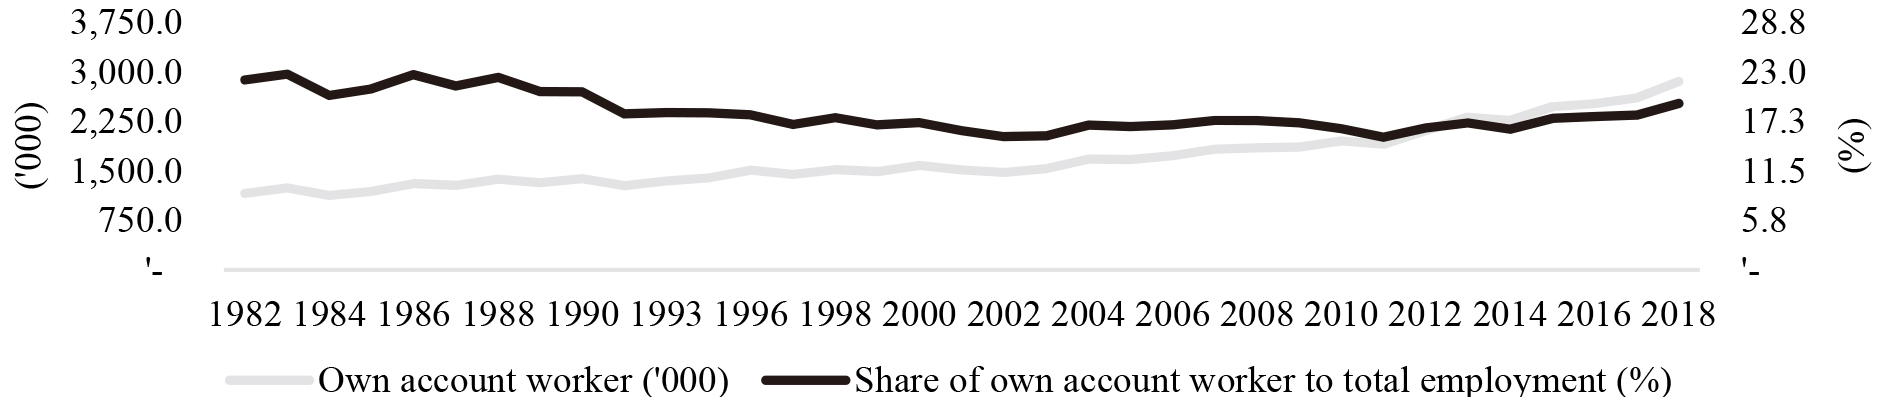 Number of own account workers and percentage share of own account worker to total employment, Malaysia, 1982–2018. Source: Labour Force Survey Time Series, Department of Statistics Malaysia (DOSM).